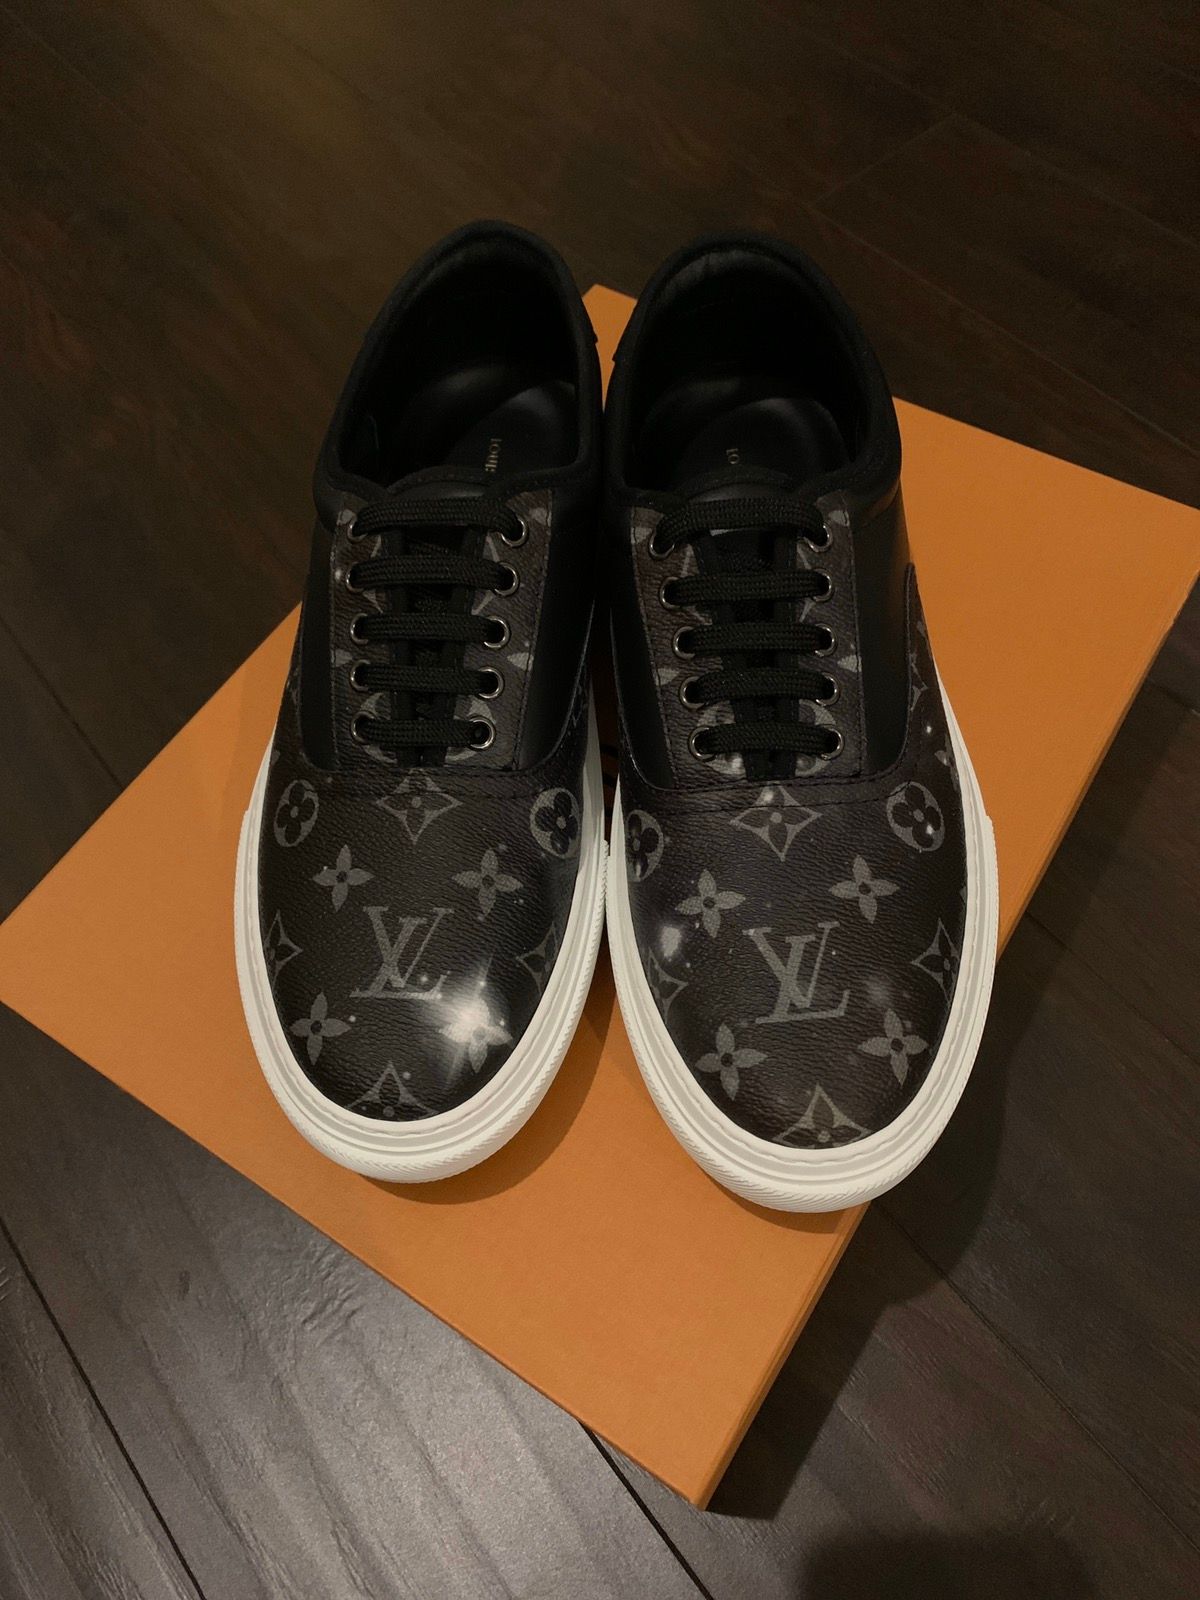 Louis Vuitton beverly hills sneaker white/blue for men LV - luxury shoes -  Fashion Sneakers, Facebook Marketplace